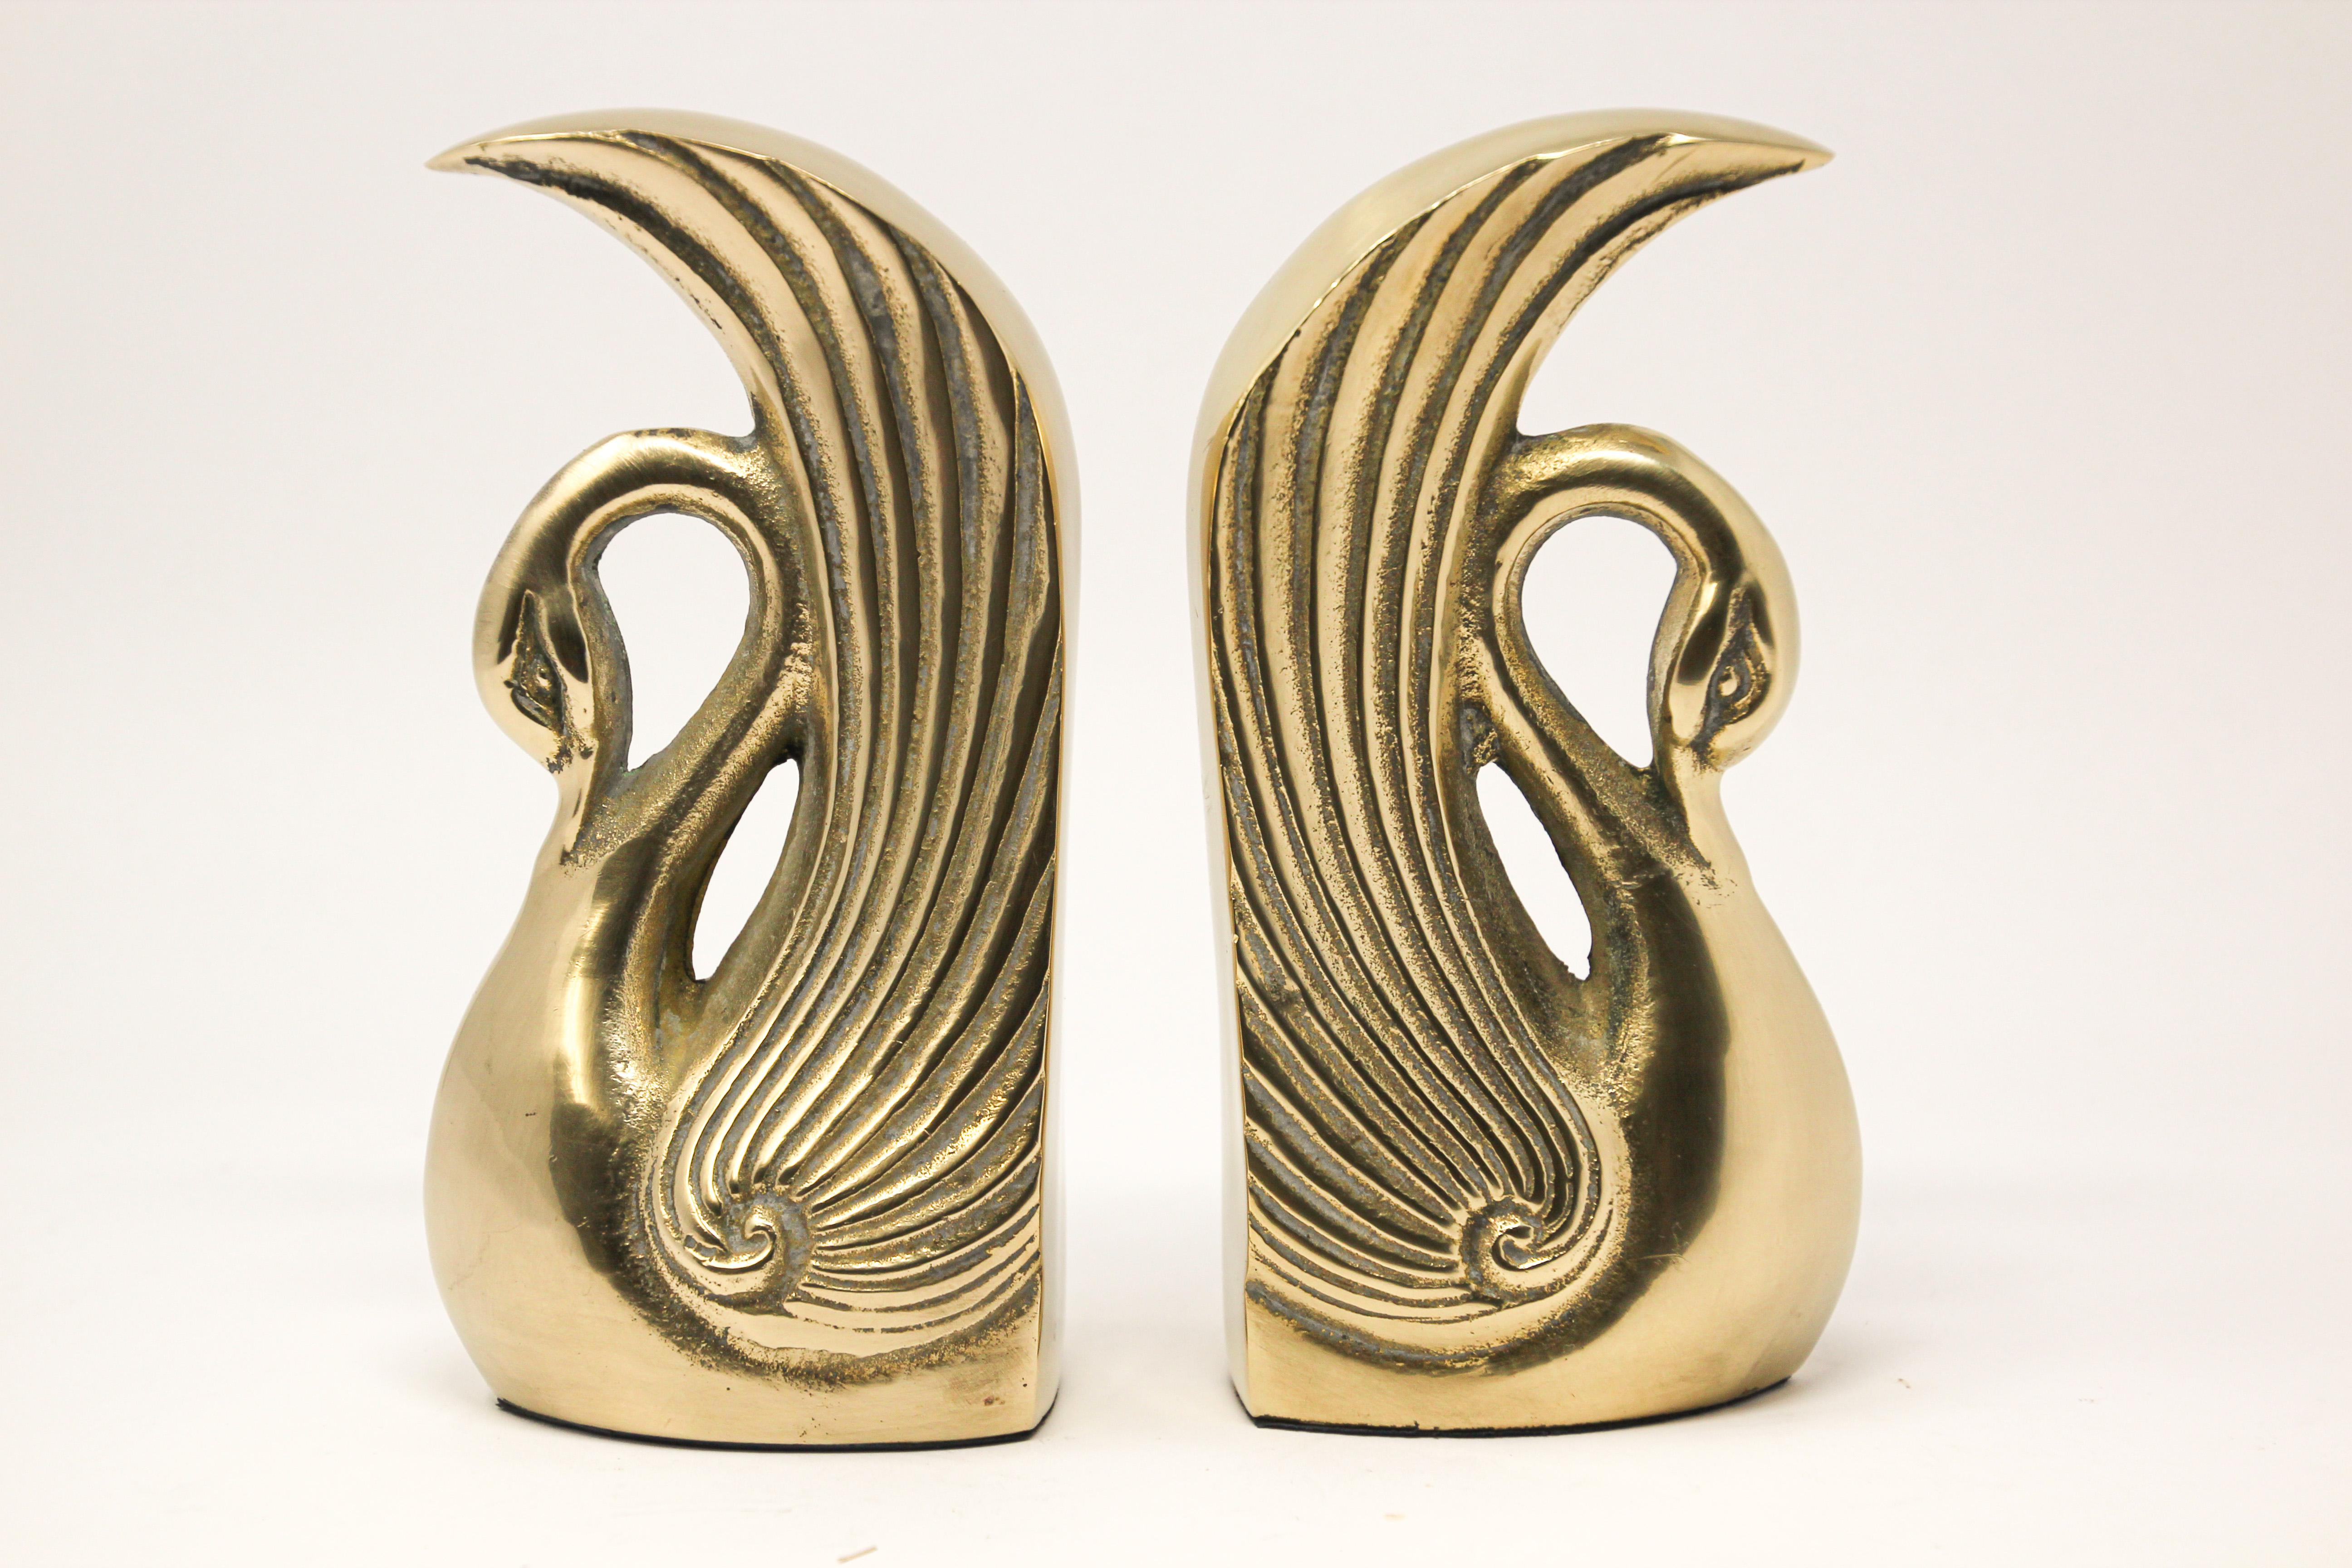 Vintage pair of polished cast brass Art Deco Swan bookends, circa 1950.
Pair of midcentury vintage cast metal polished decorative brass swan bookends in Sarried style.
Very sturdy and heavy.
Great for holding up books on a bookshelf or as paper